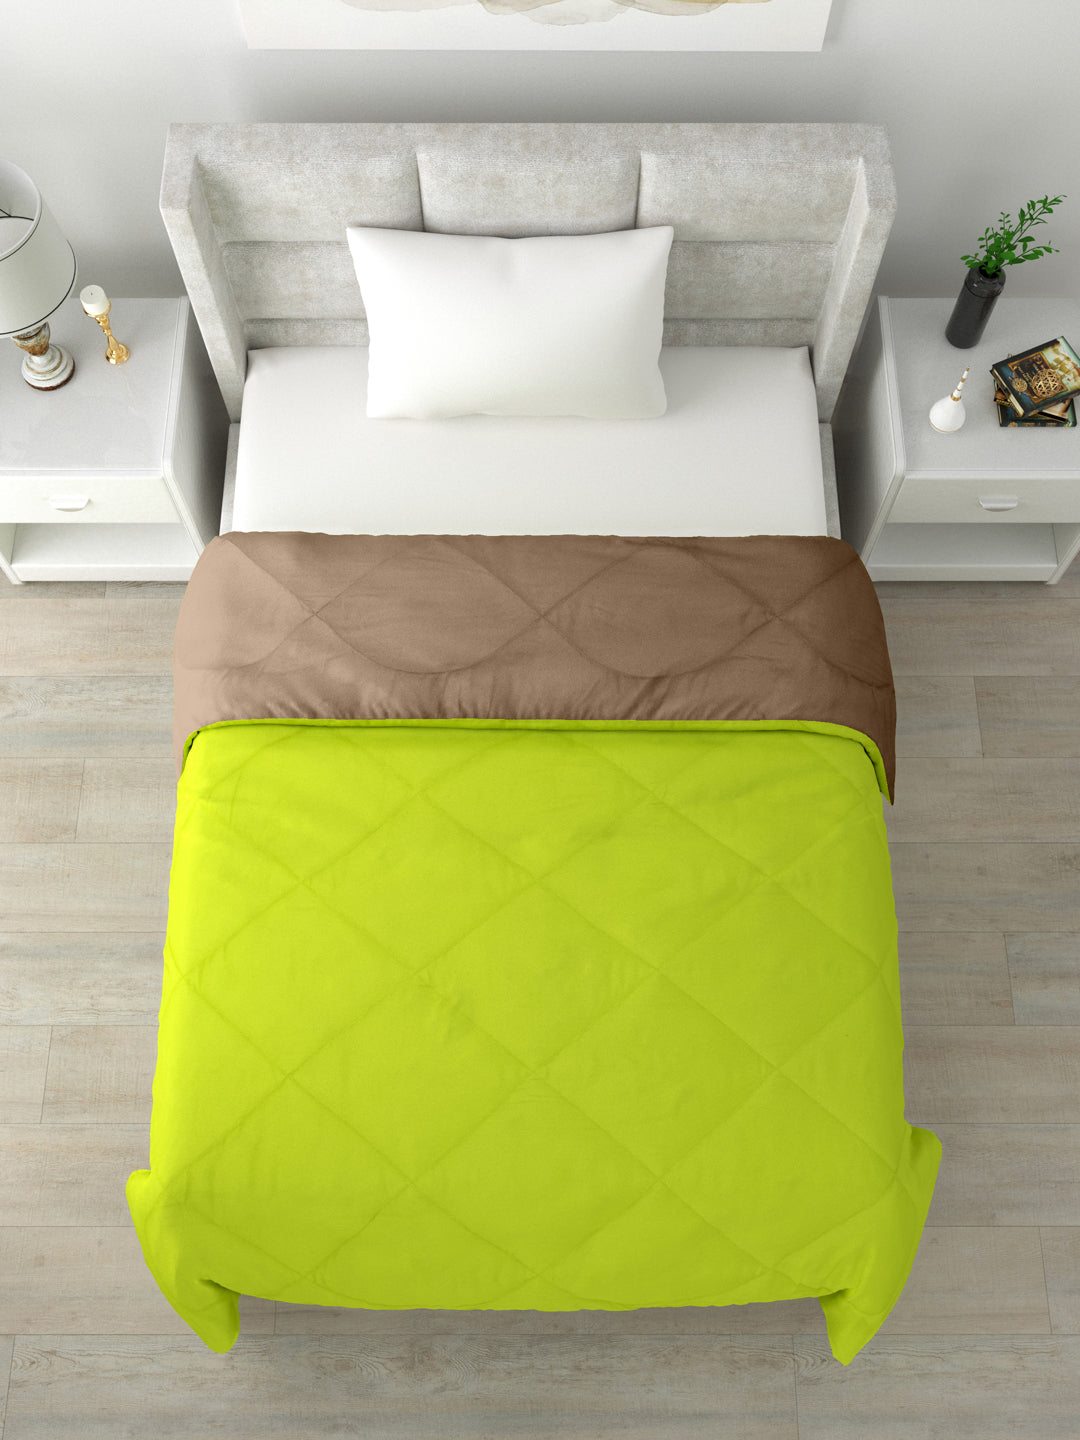 Reversible Single Bed Comforter 200 GSM 60x90 Inches (Green & Taupe)